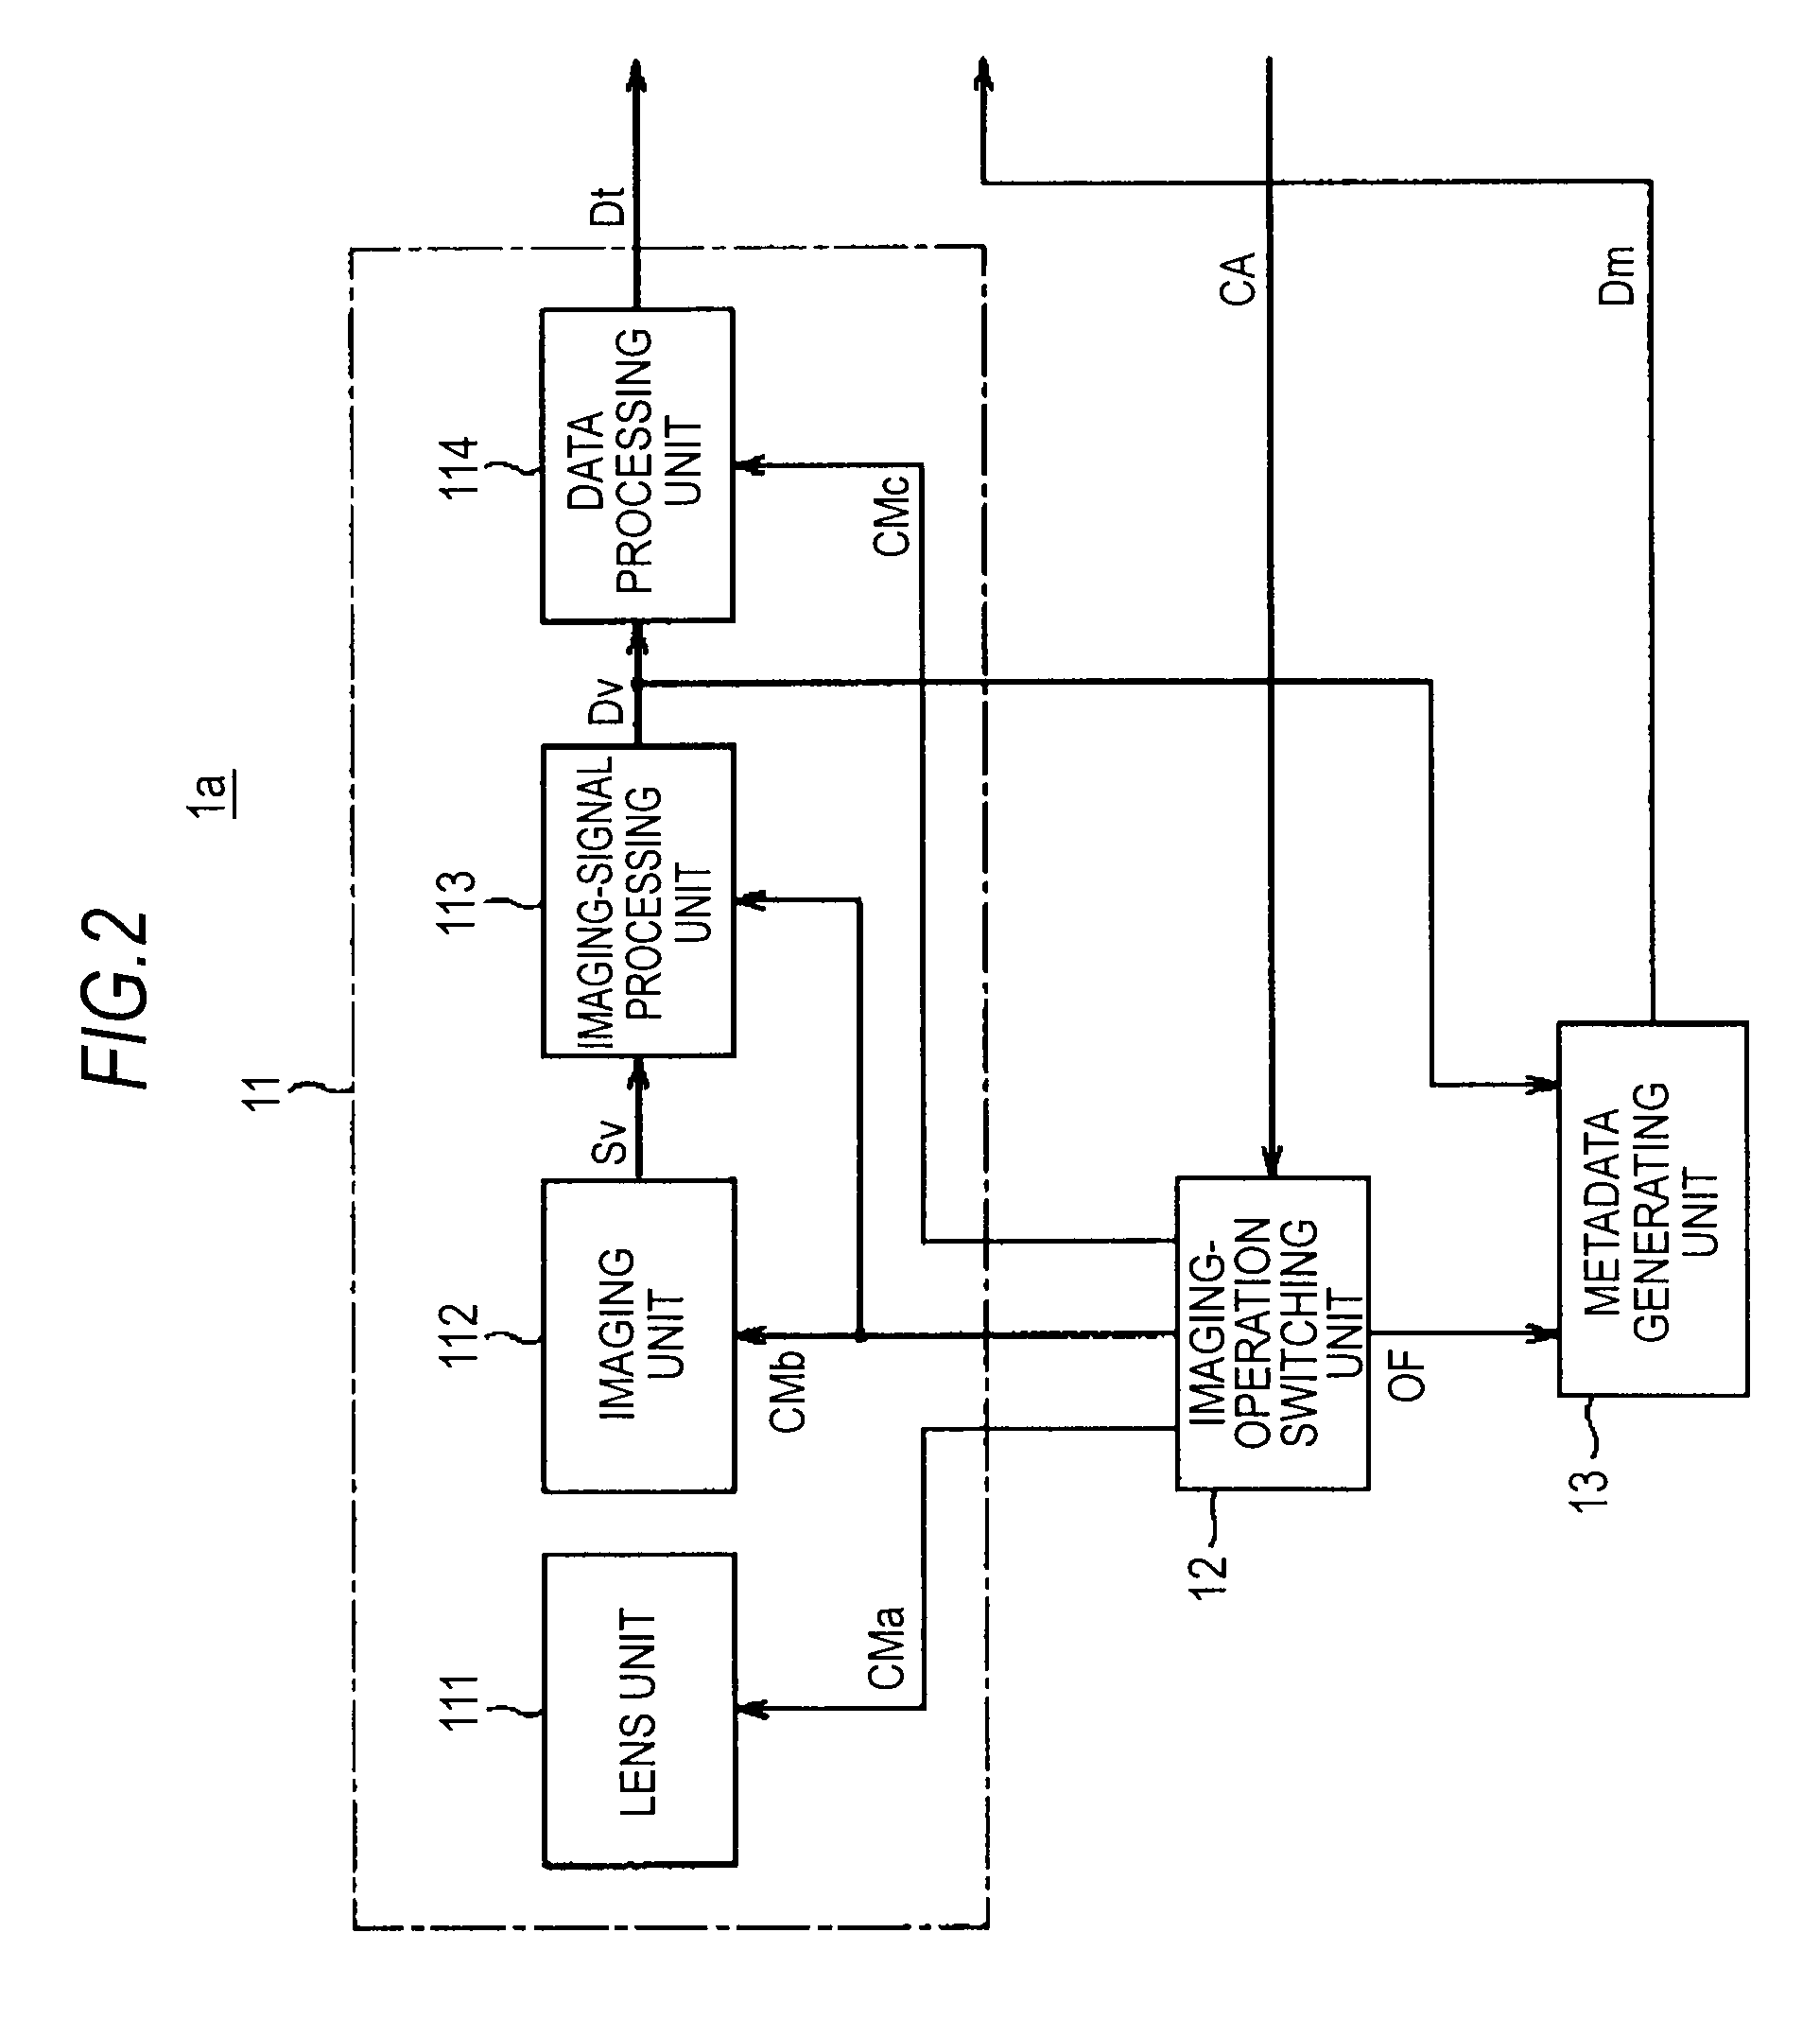 Image processing system, image processing method, and computer program